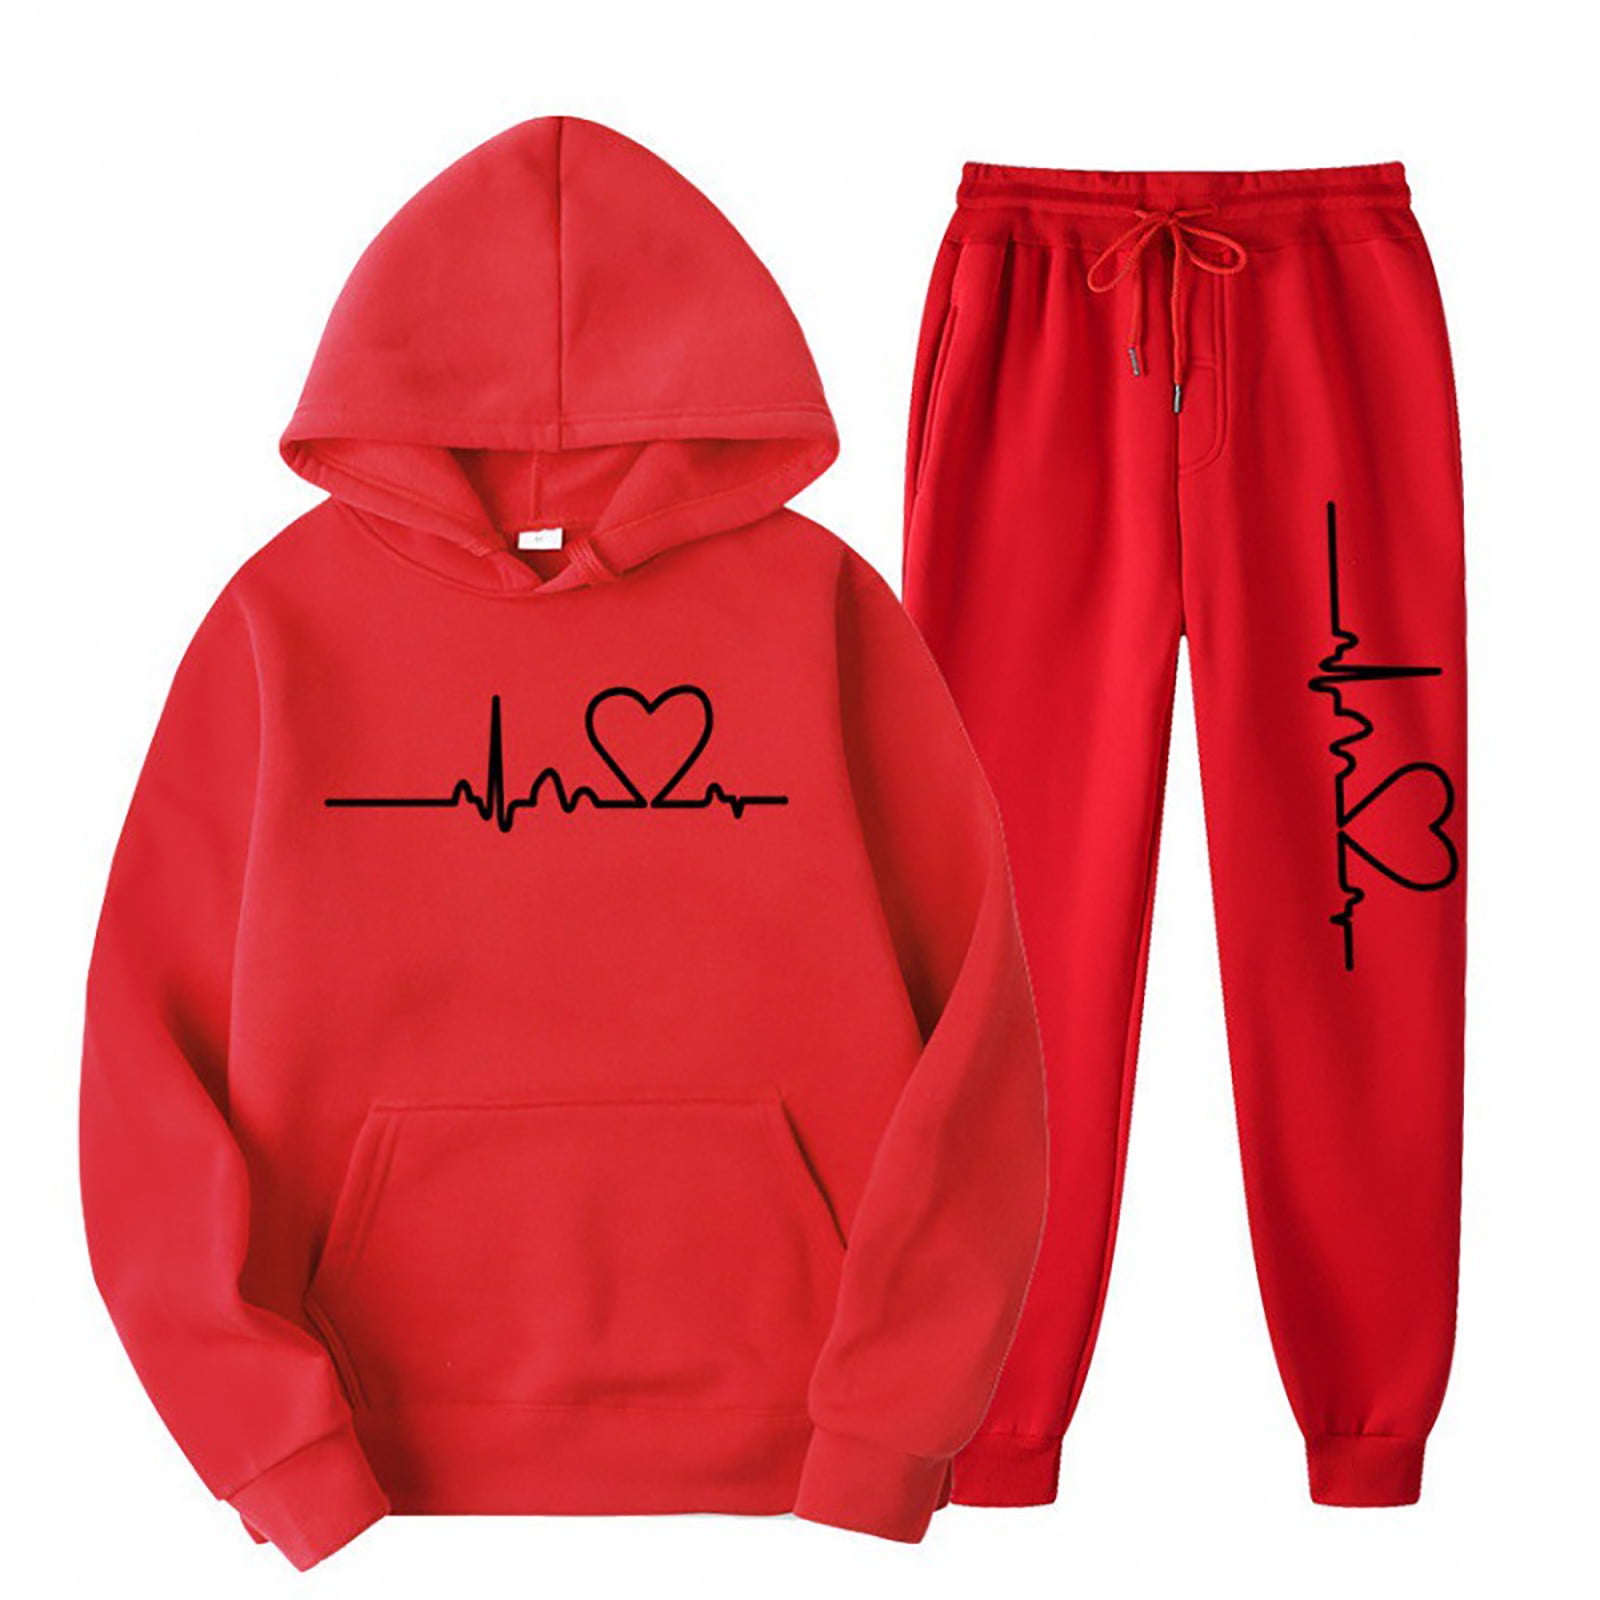  My Order Women's 2 Piece Tracksuit Cute Love Heart Graphic  Sweatsuit Long Sleeve Pullover and Sweatpants Jogger Workout Set   Clearance Items Outlet 90 Percent off : Ropa, Zapatos y Joyería